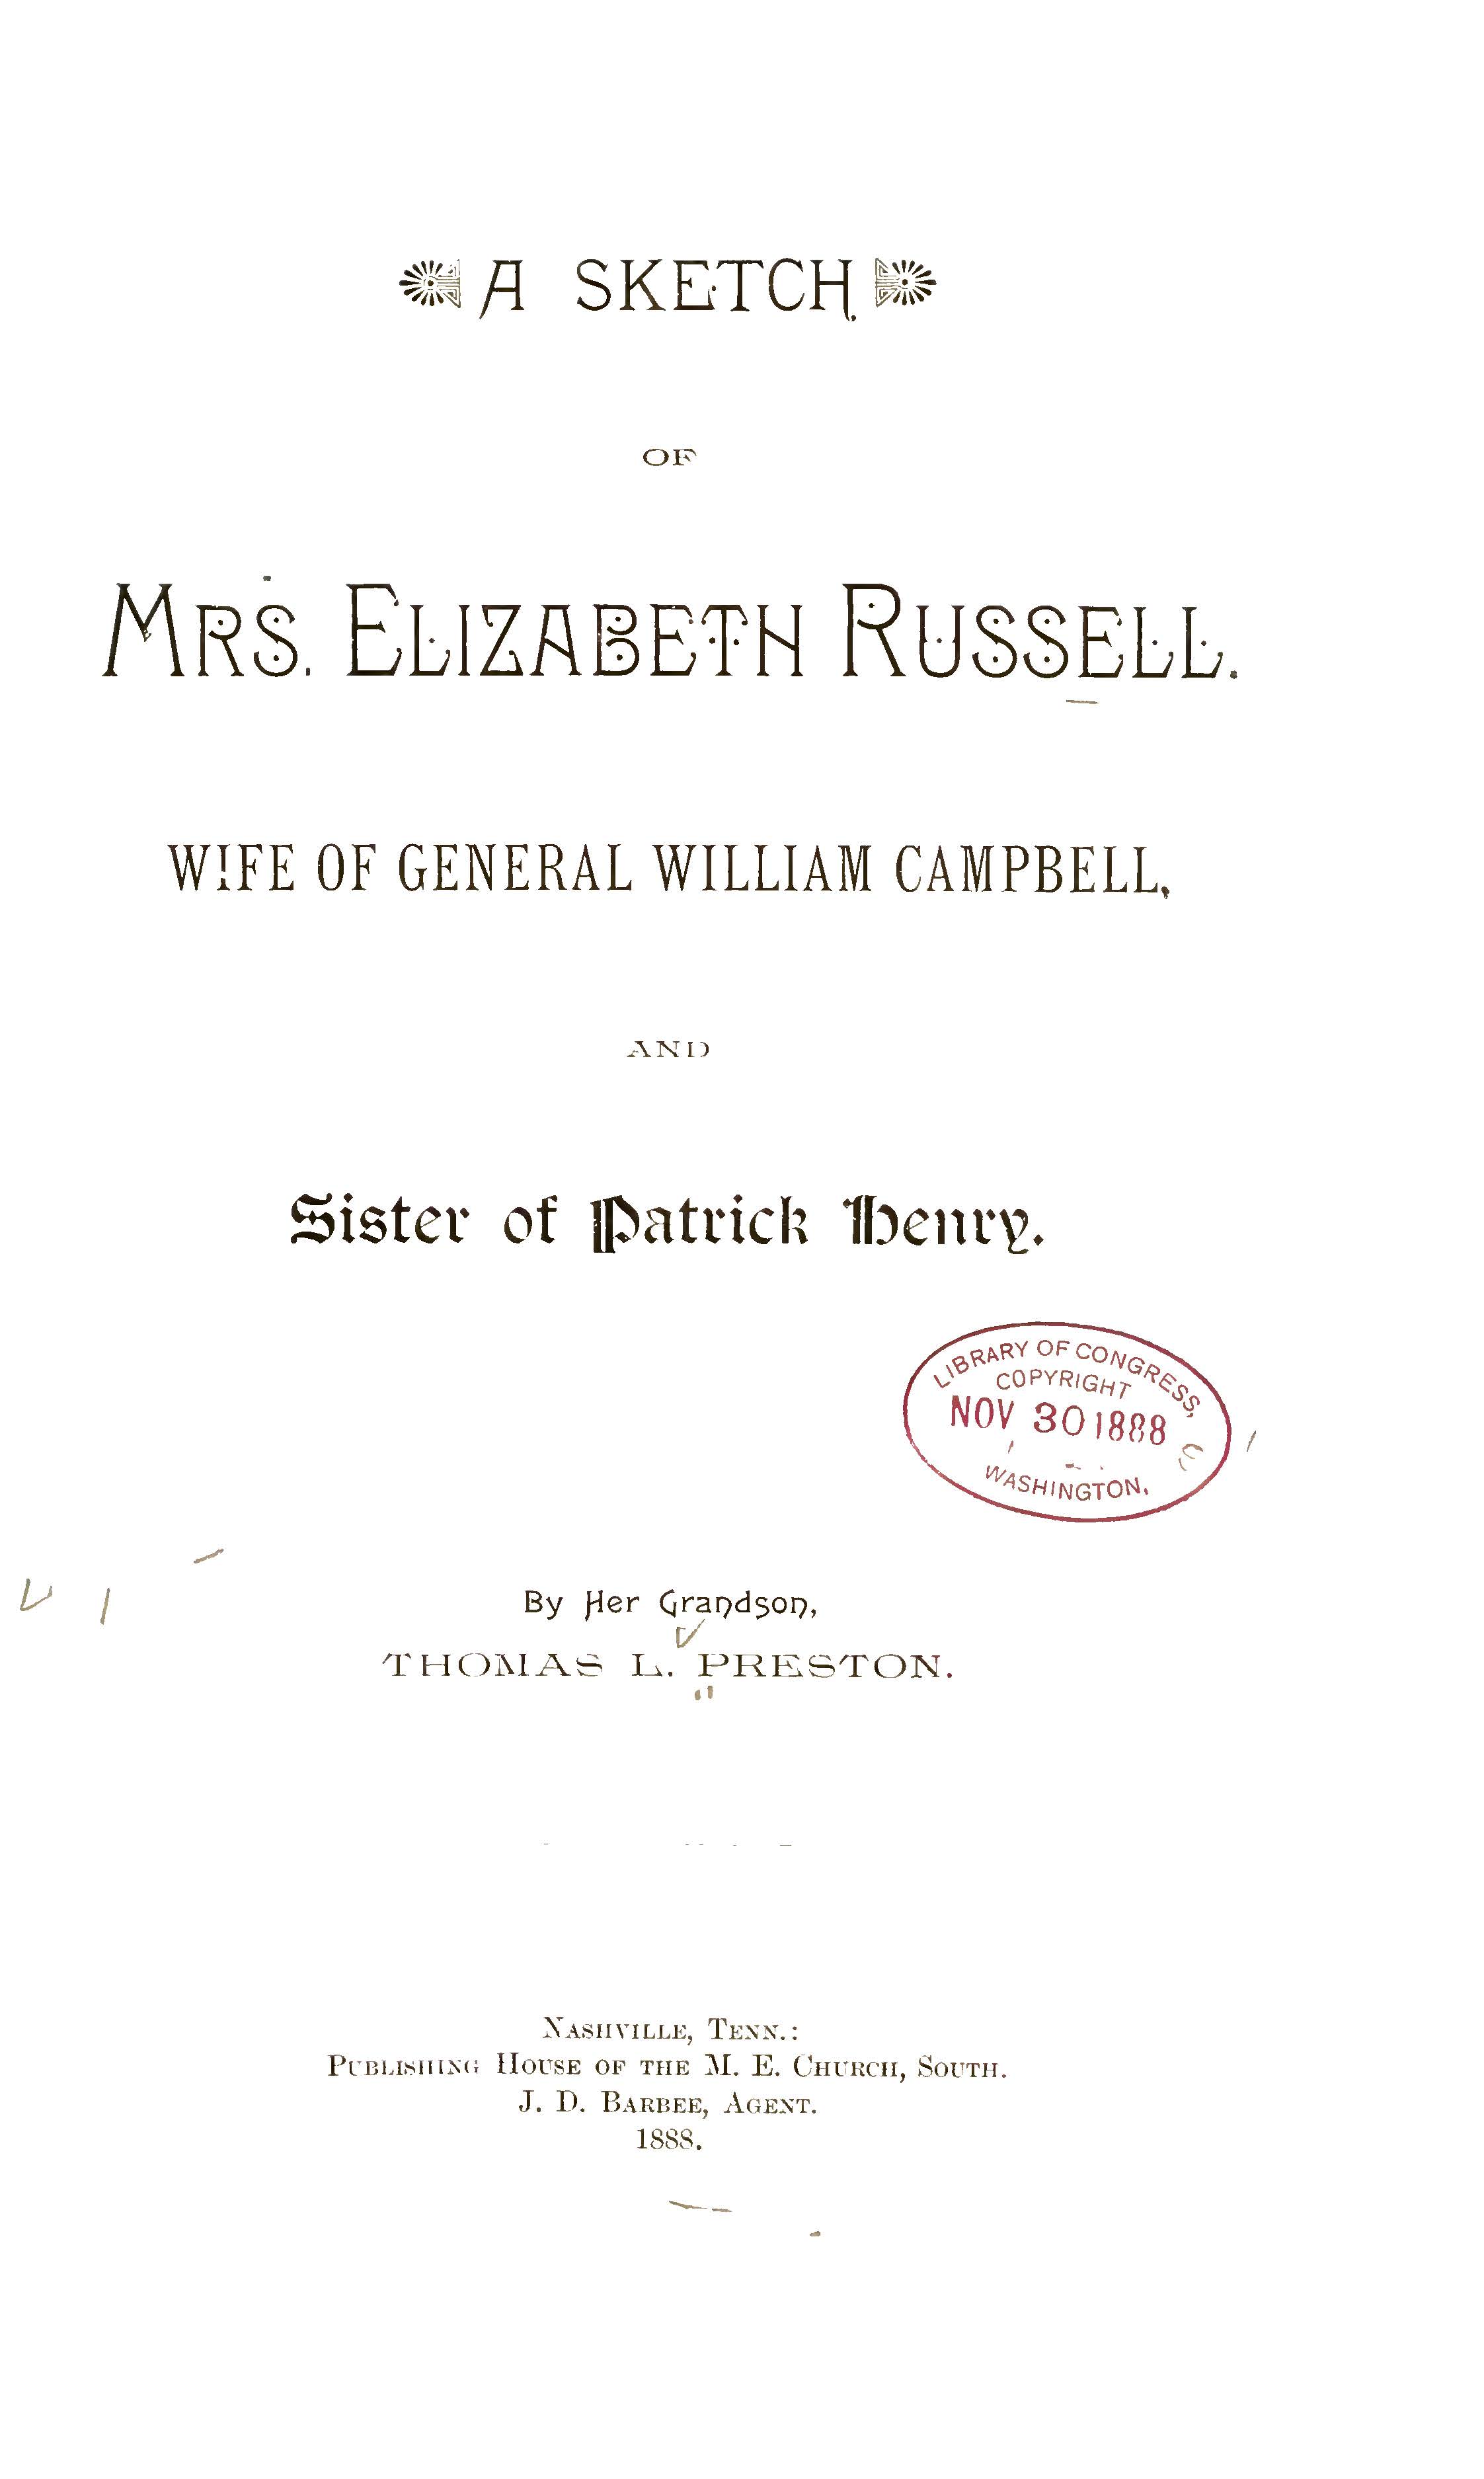 A sketch of Mrs. Elizabeth Russell, wife of General William Campbell, and sister of Patrick Henry